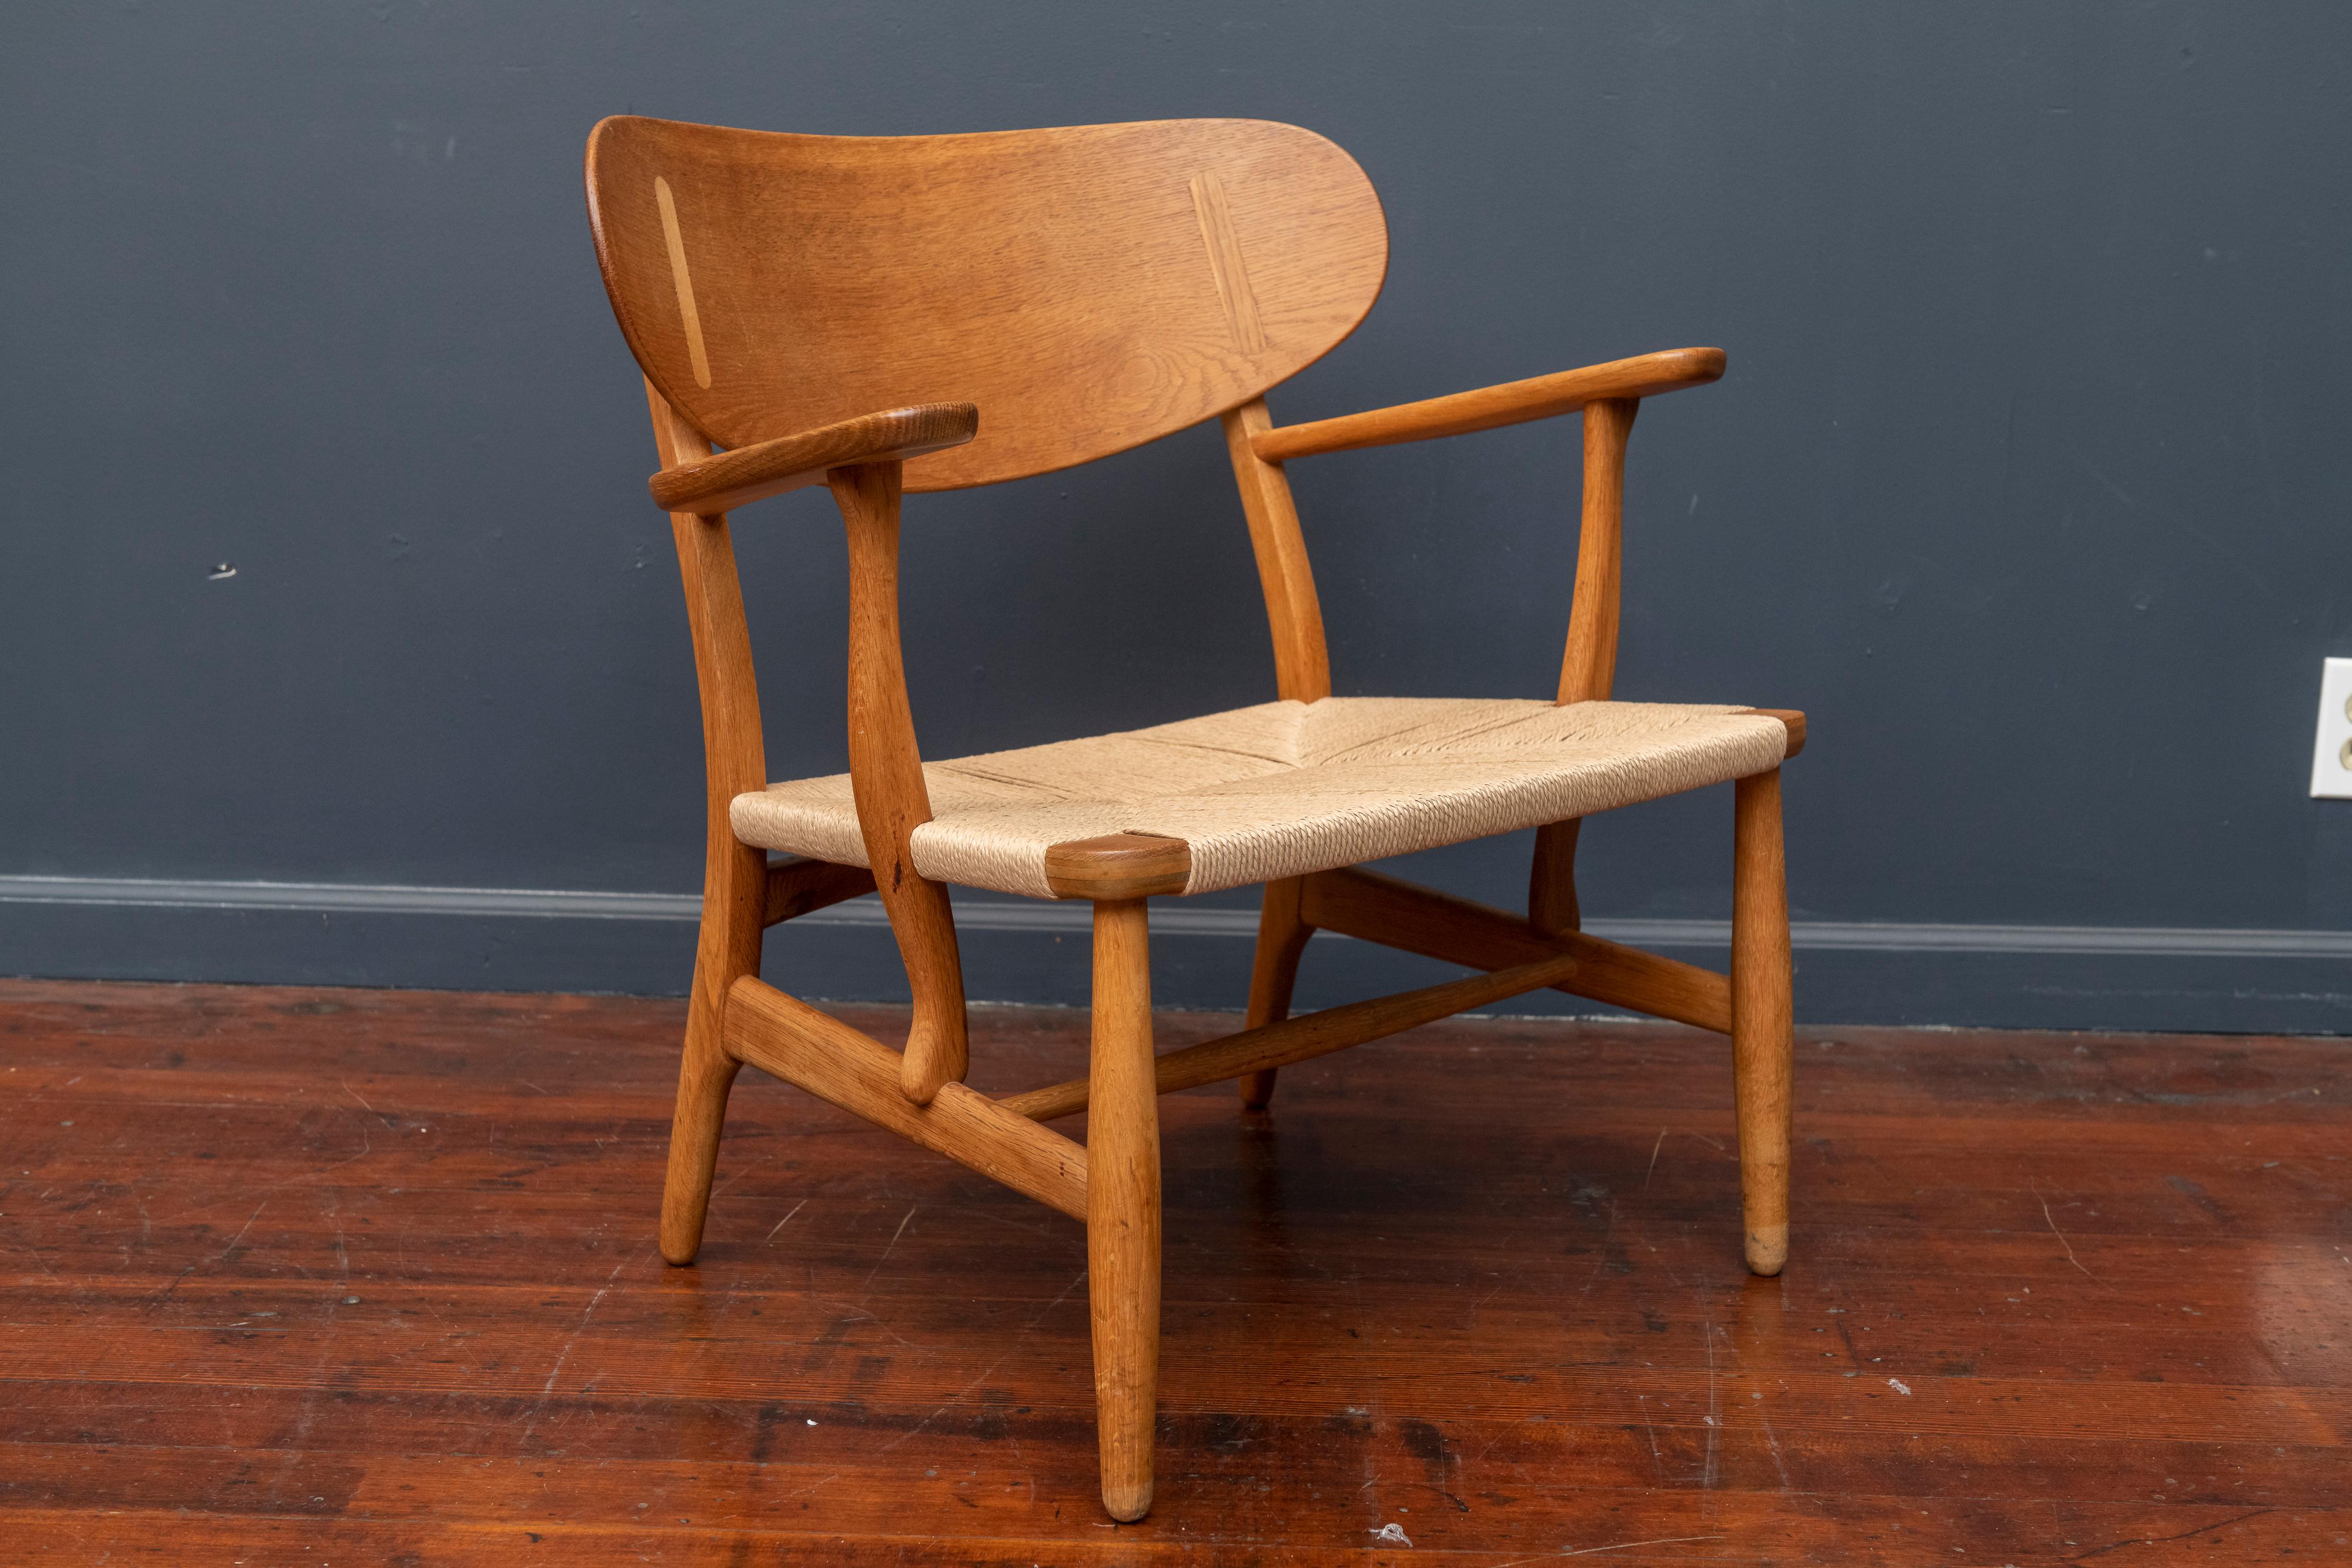 Hans Wegner design teak and oak lounge chair, model CH-22 for Carl Hanson & Son, Denmark. Excellent structural condition with original finish and a new woven seat.